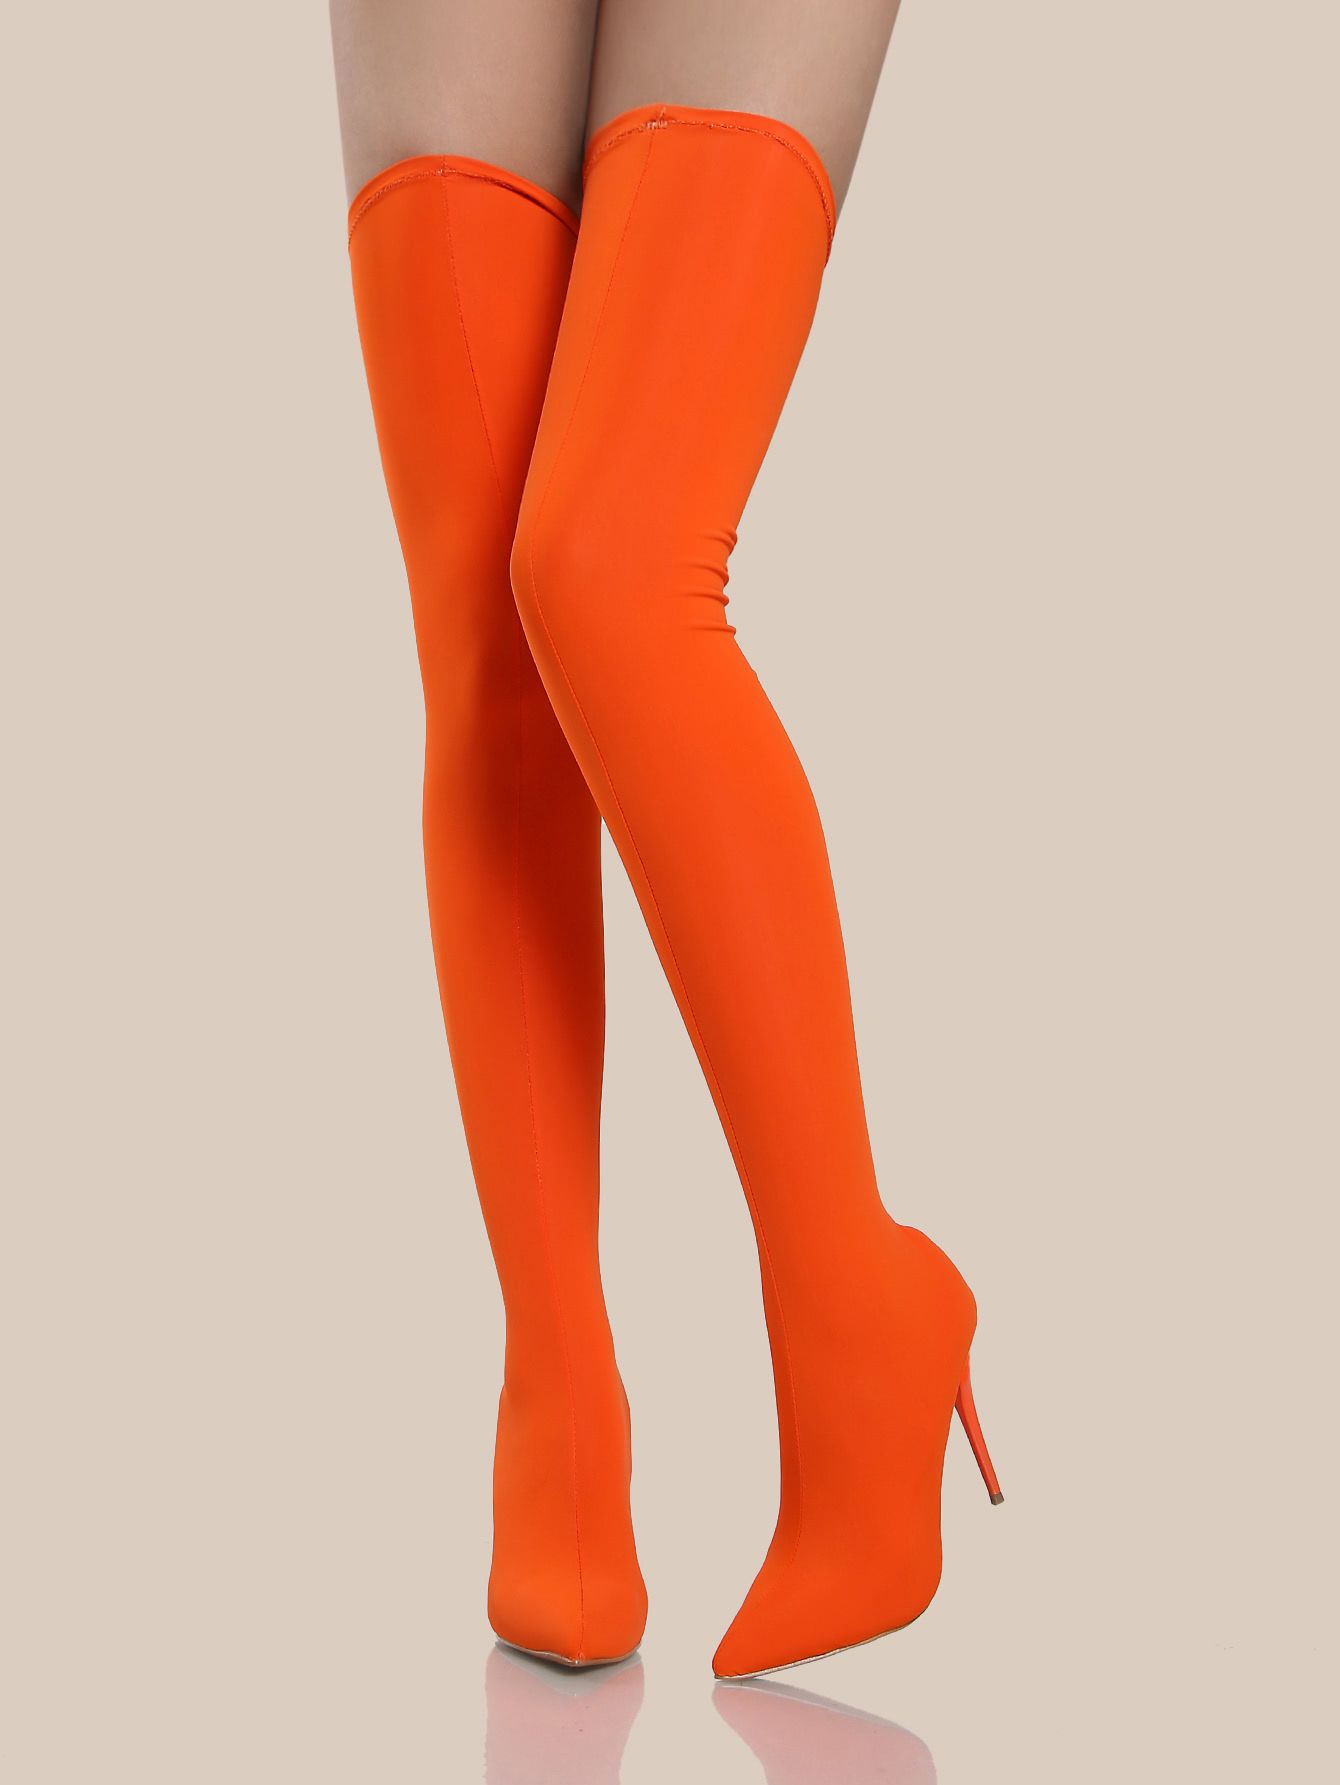 How to Wear Orange Heels: 15 Cool & Attractive Outfit Ideas